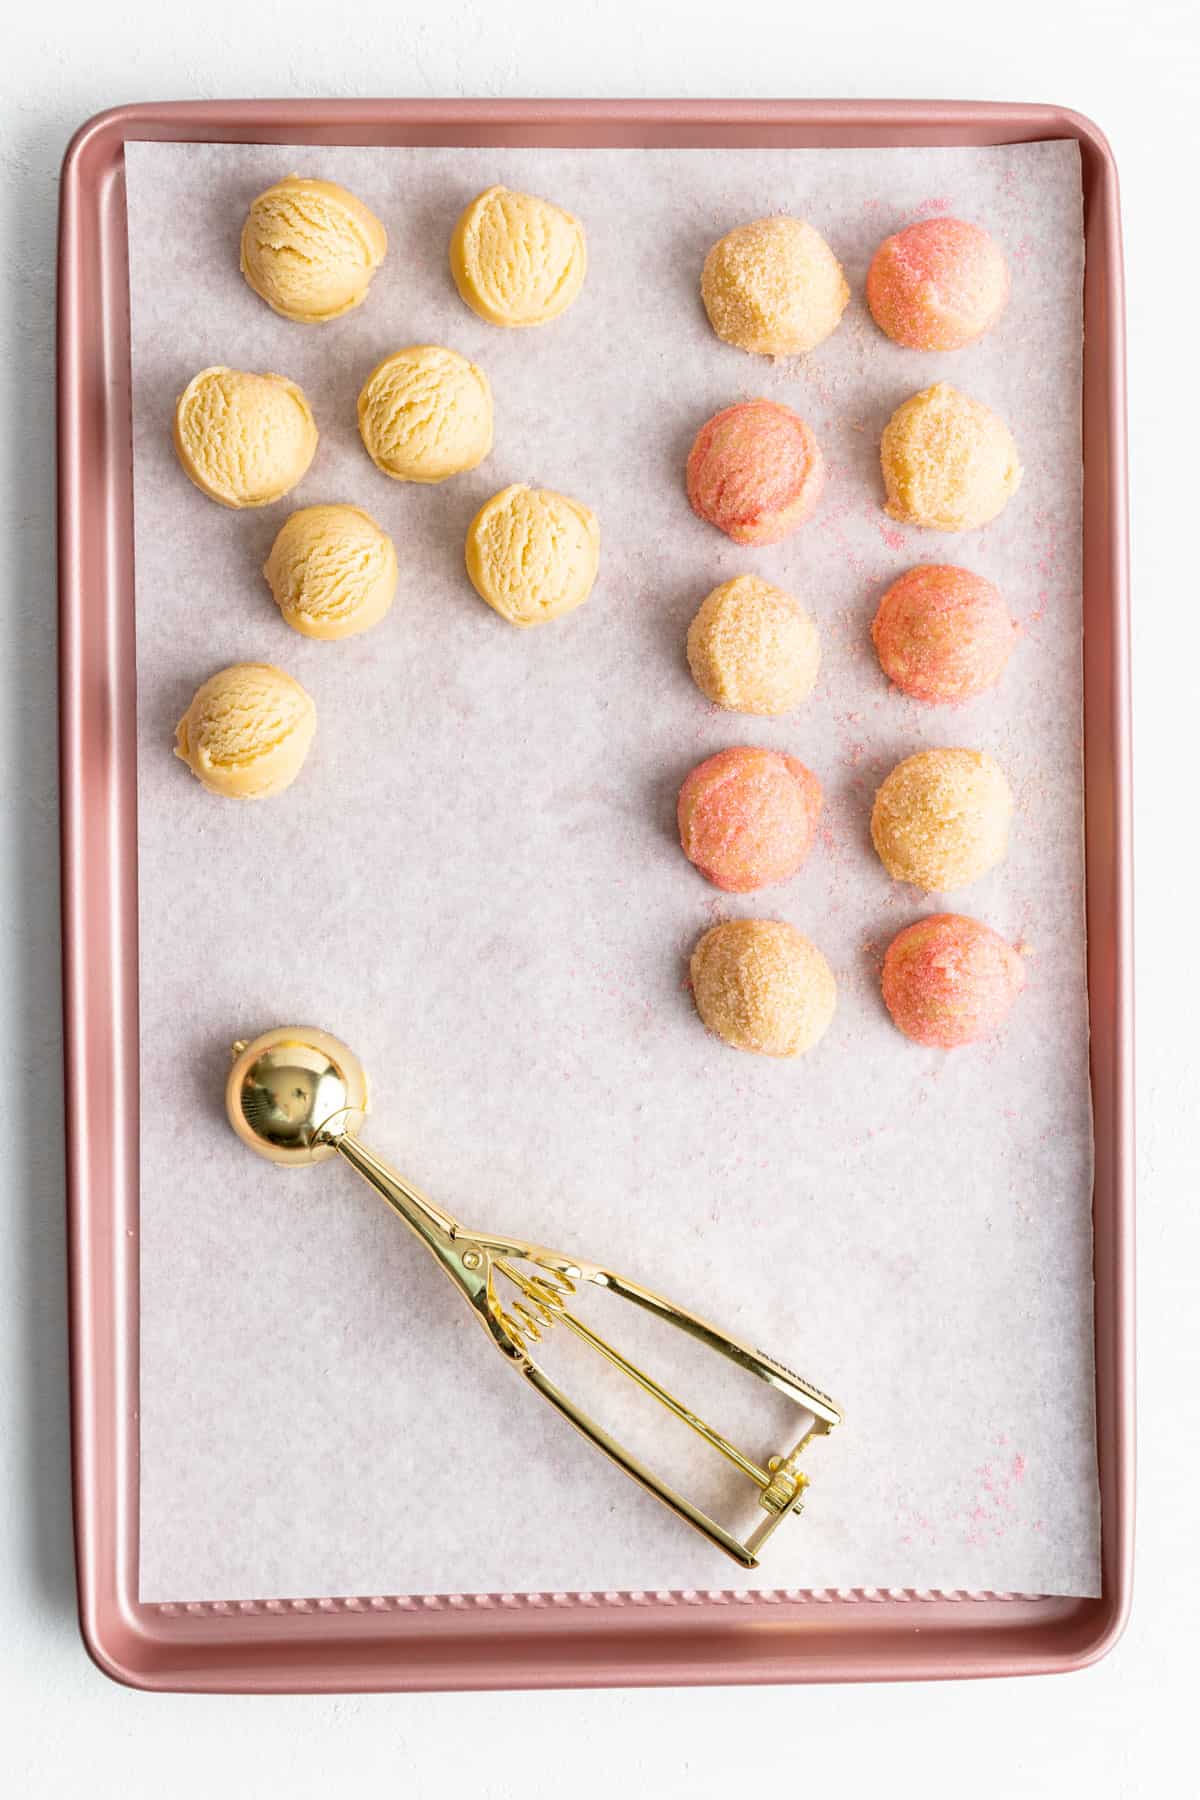 uncoated and orange and pink sugar coated dough balls on a pink parchment-lined baking sheet.